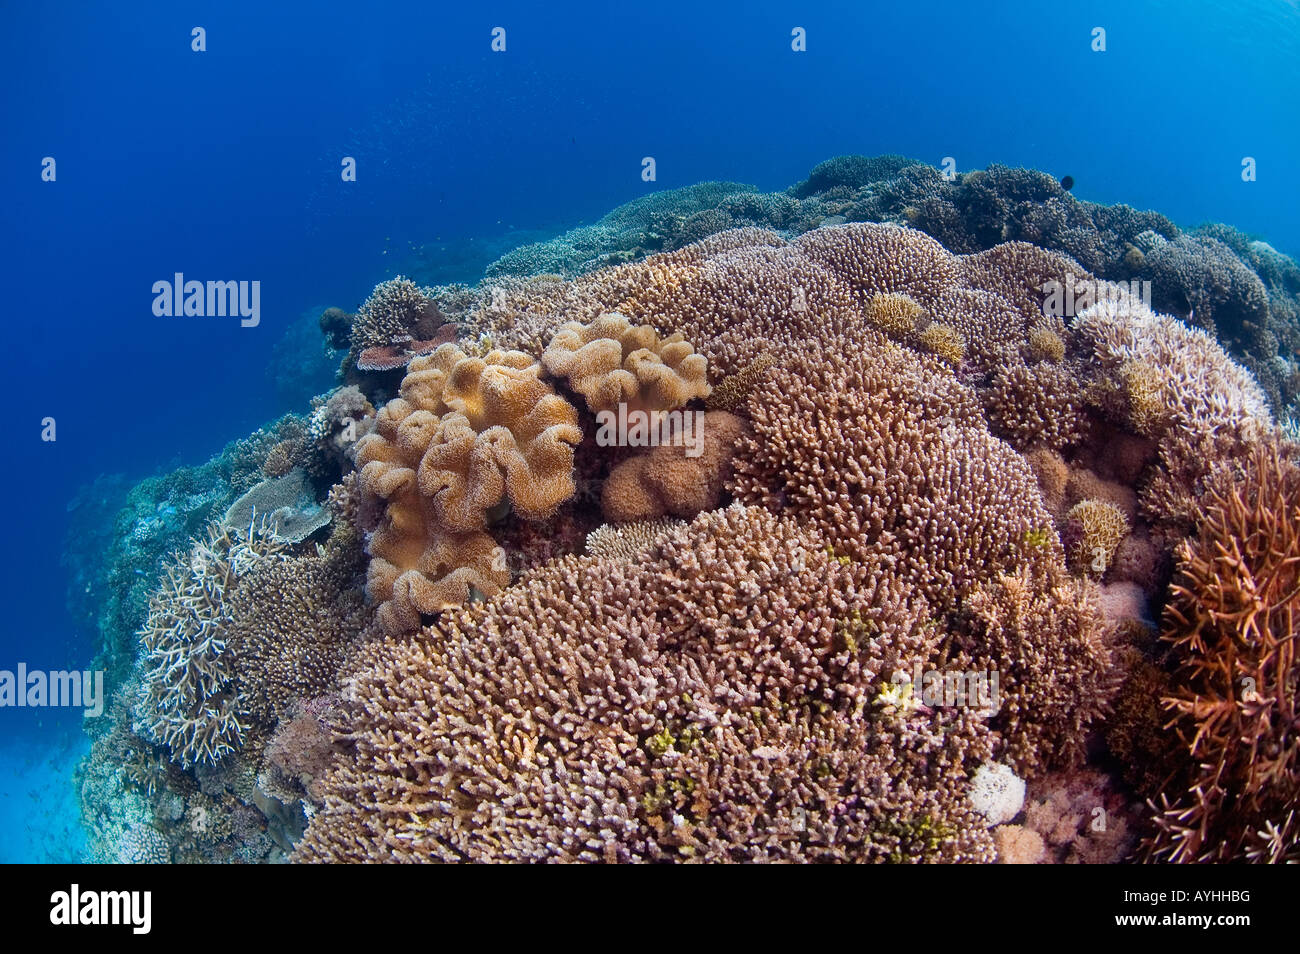 Healthy hard coral reef scene with several species of hard coral including Staghorn Acropora sp and Table Porites sp Layang Stock Photo